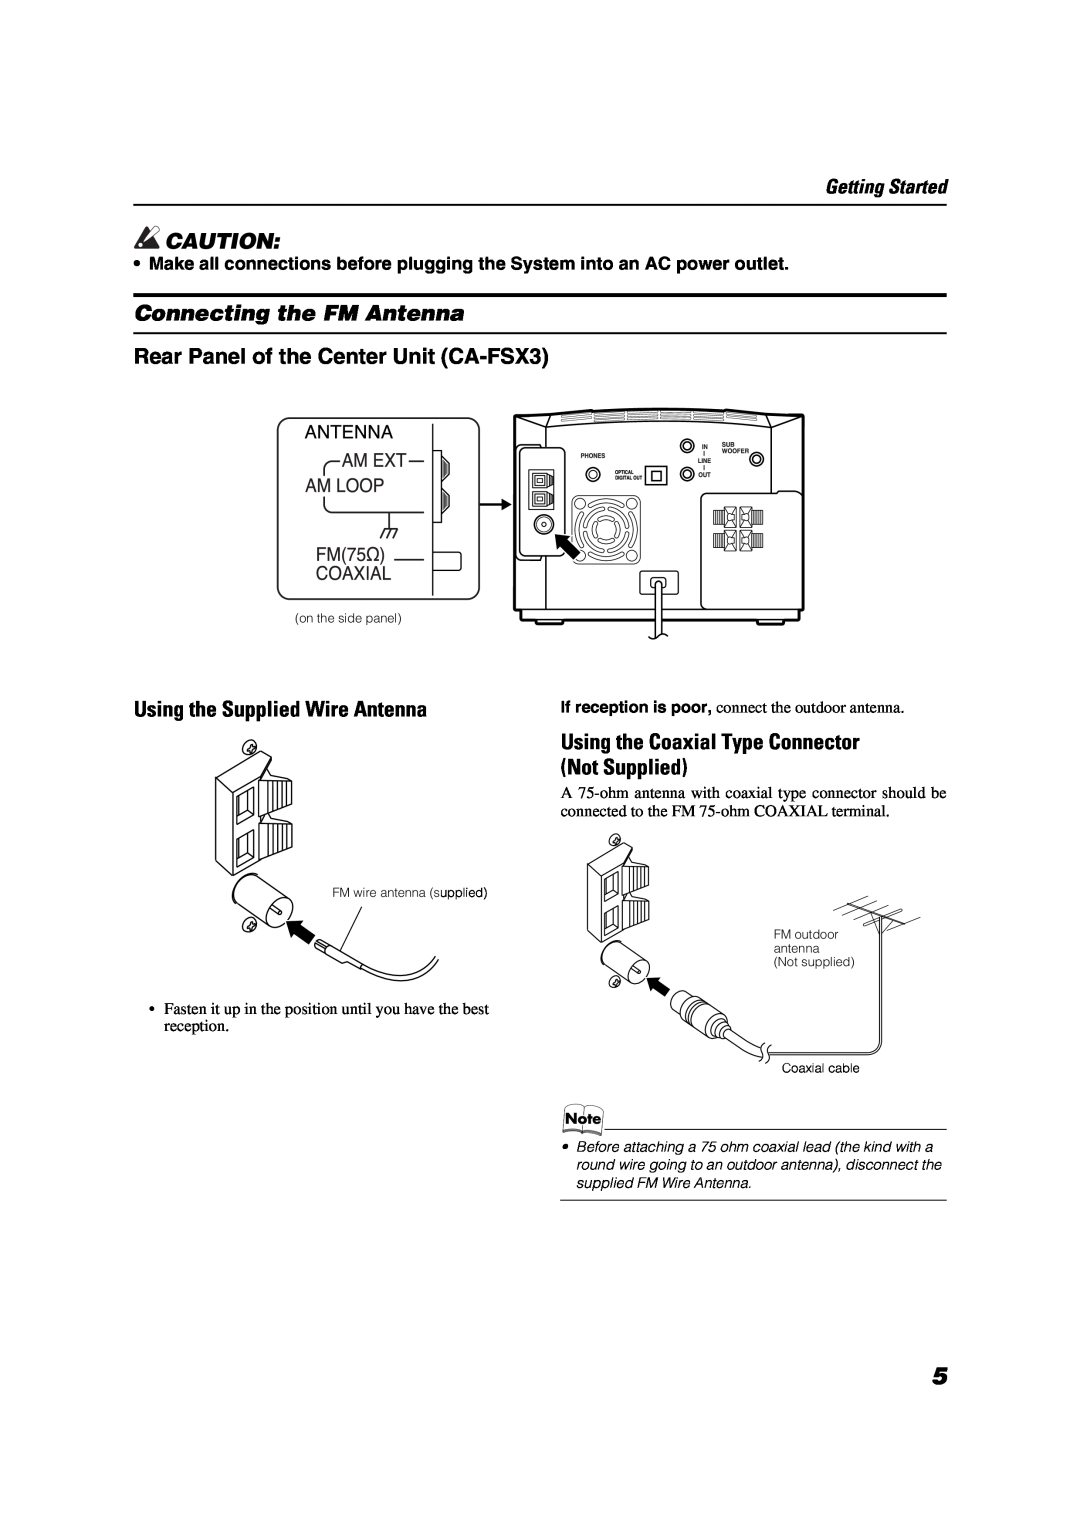 JVC LVT1040-008A manual Connecting the FM Antenna, Rear Panel of the Center Unit CA-FSX3, Using the Supplied Wire Antenna 